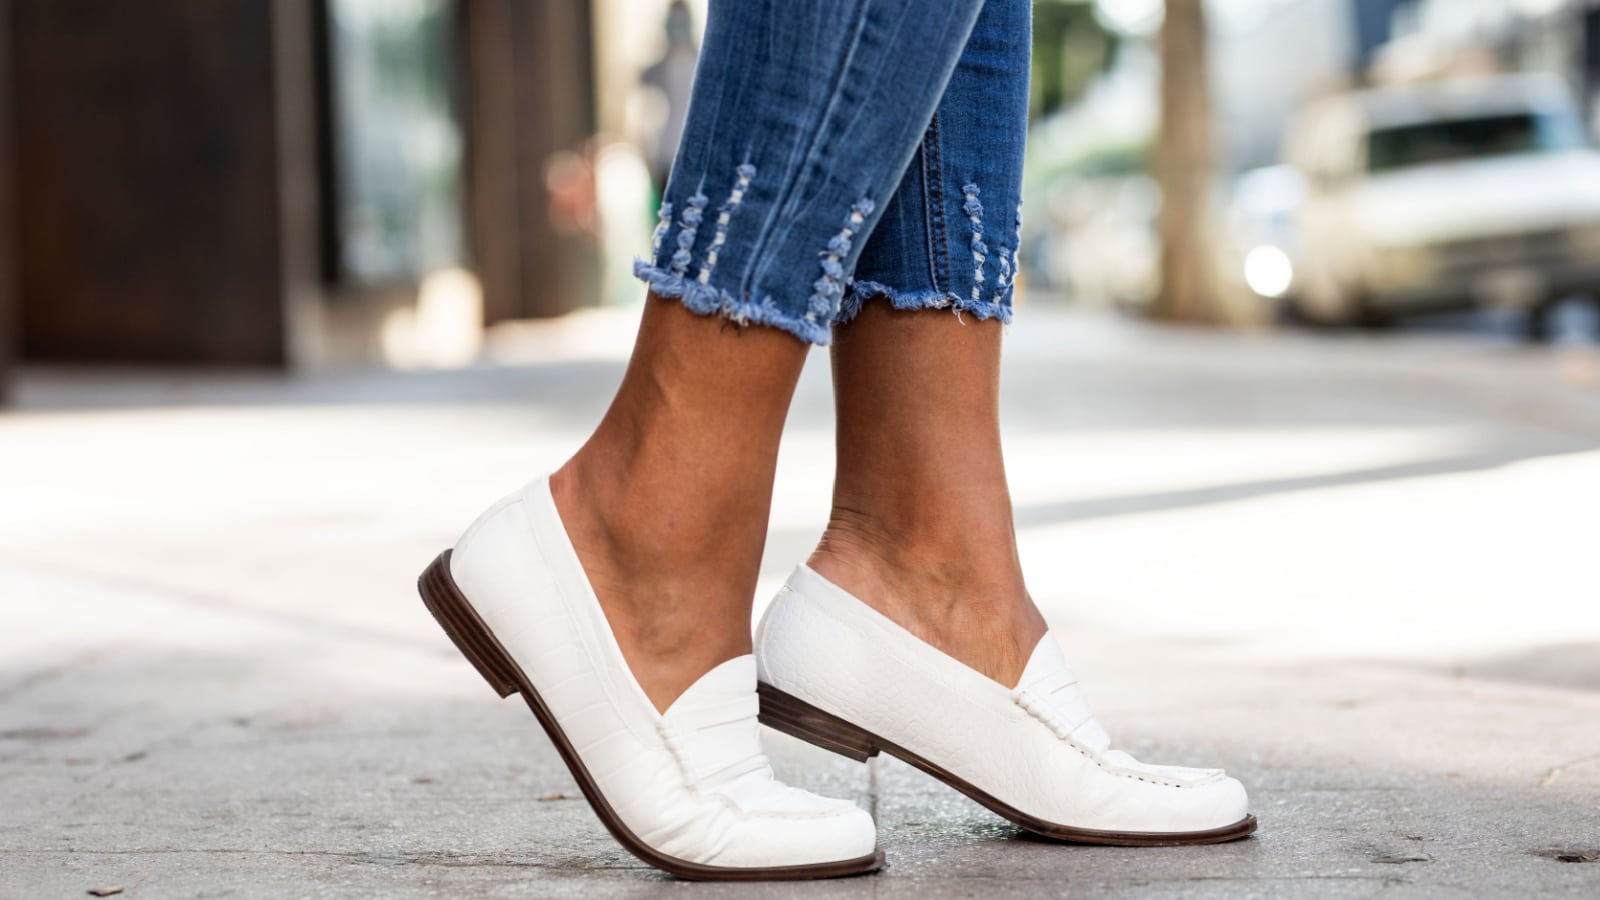 <p>If you’re planning a trip, you’re probably wondering what shoes to pack. You want to ensure your feet are comfortable and supported with all the walking you’ll do. Recently, on a platform, travelers shared their favorite shoes for exploring the city</p> <p><strong>Read more: <a href="https://www.have-clothes-will-travel.com/10-best-shoes-to-wear-on-a-city-vacation-with-tons-of-walking/" rel="noreferrer noopener">10 Best Shoes to Wear on a Vacation with Tons of Walking</a></strong></p>